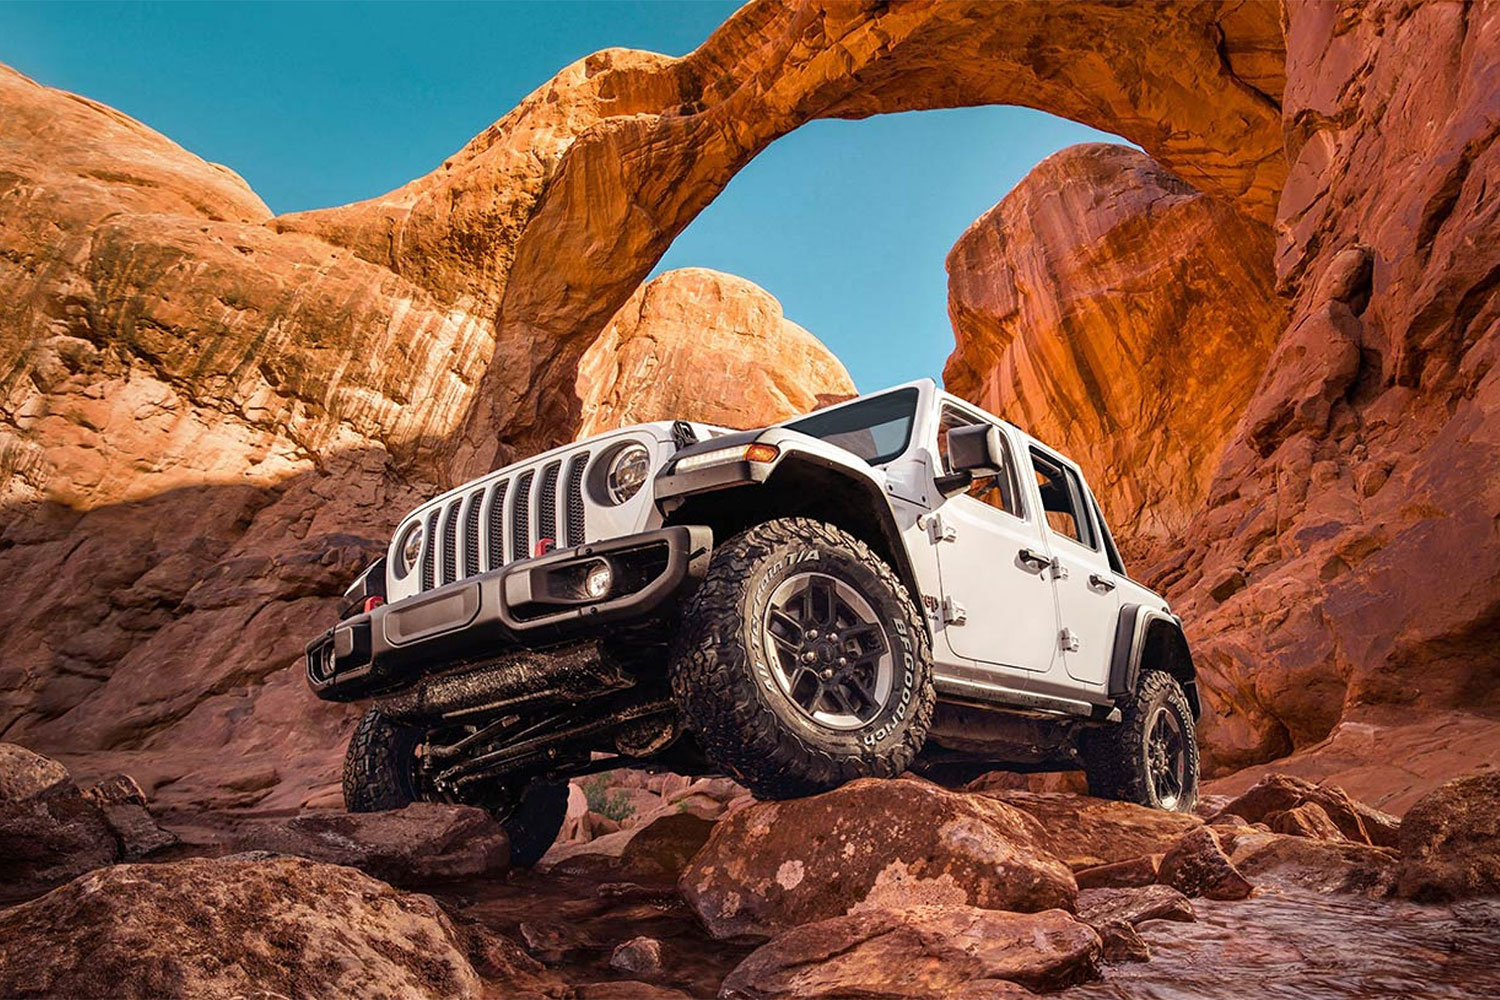 Get far, far off the beaten path with the best off-road vehicles